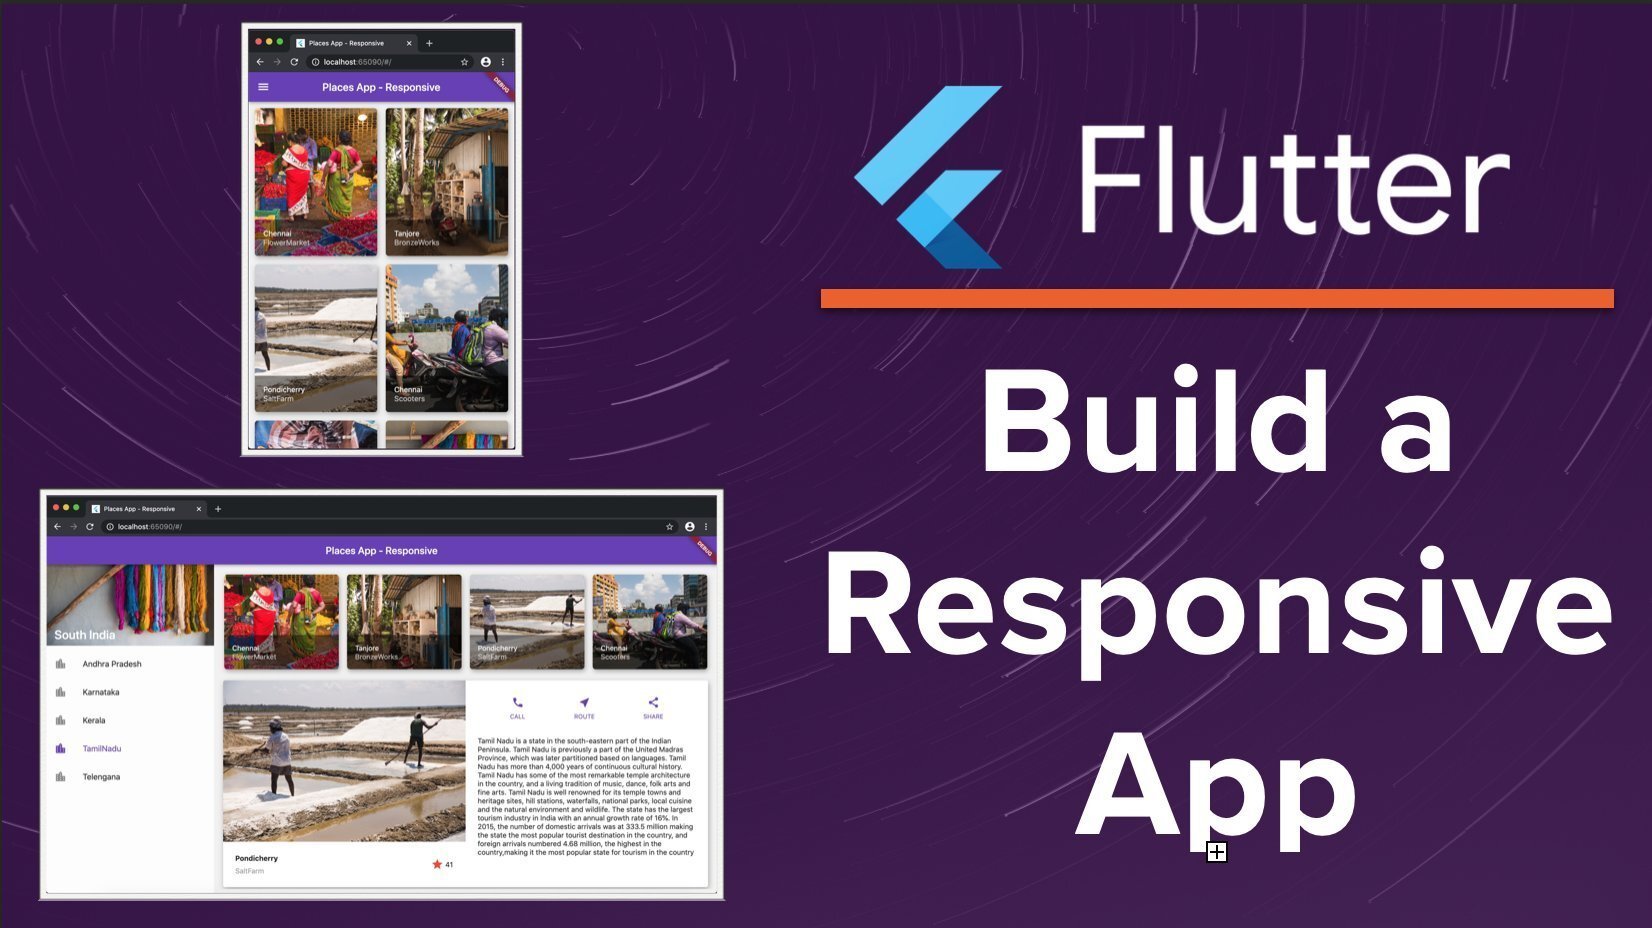 How to build a responsive application on Flutter?